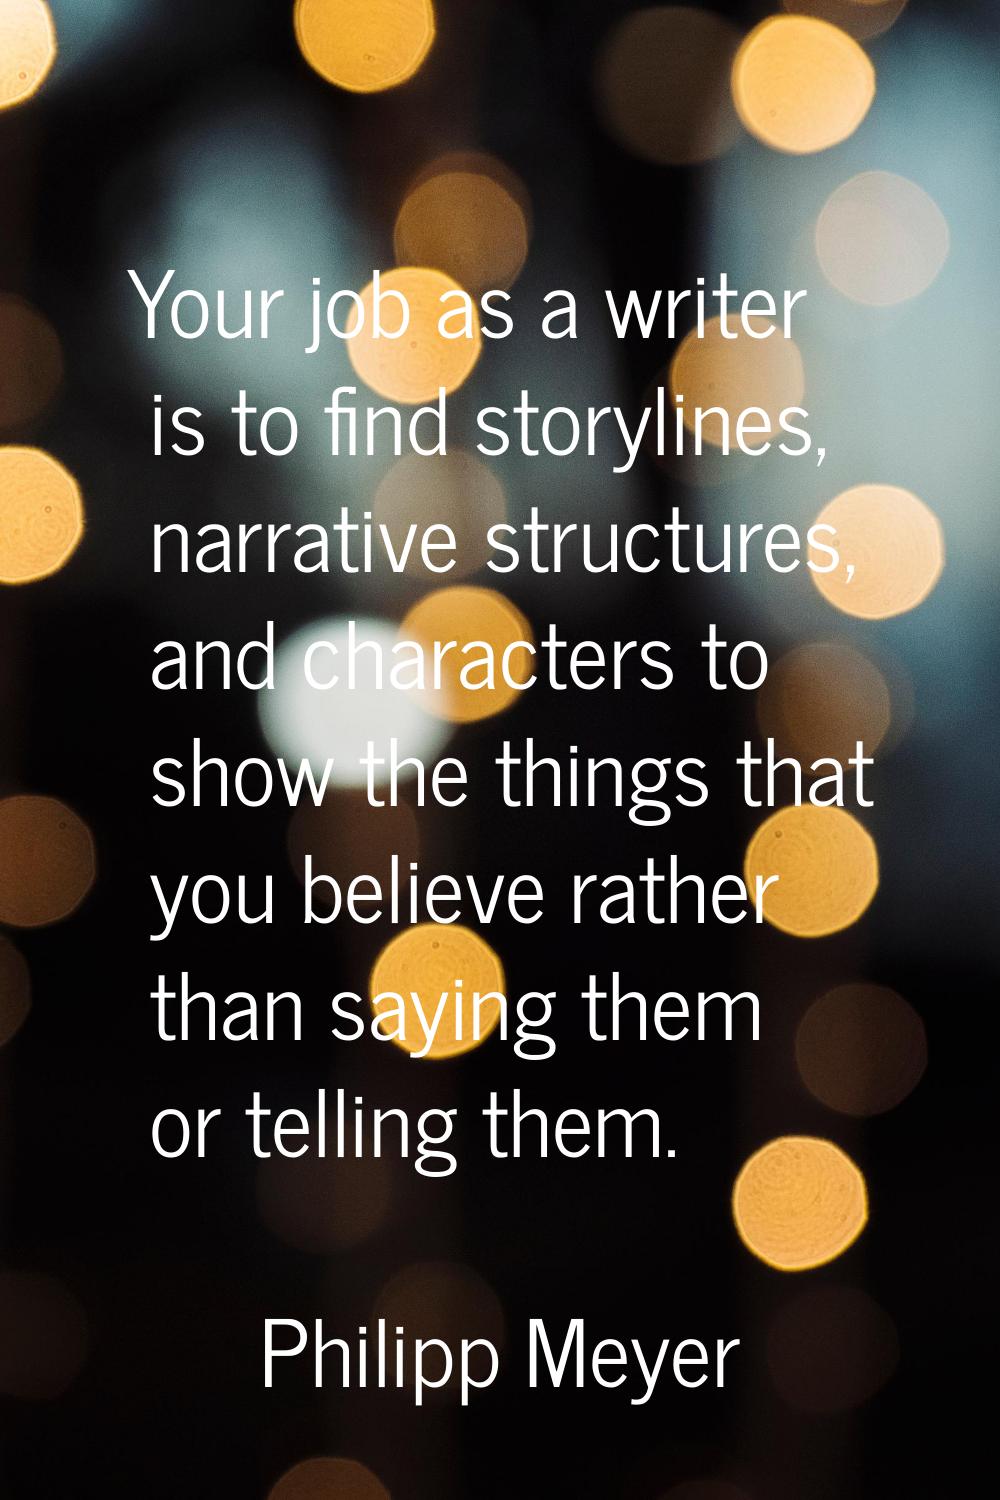 Your job as a writer is to find storylines, narrative structures, and characters to show the things